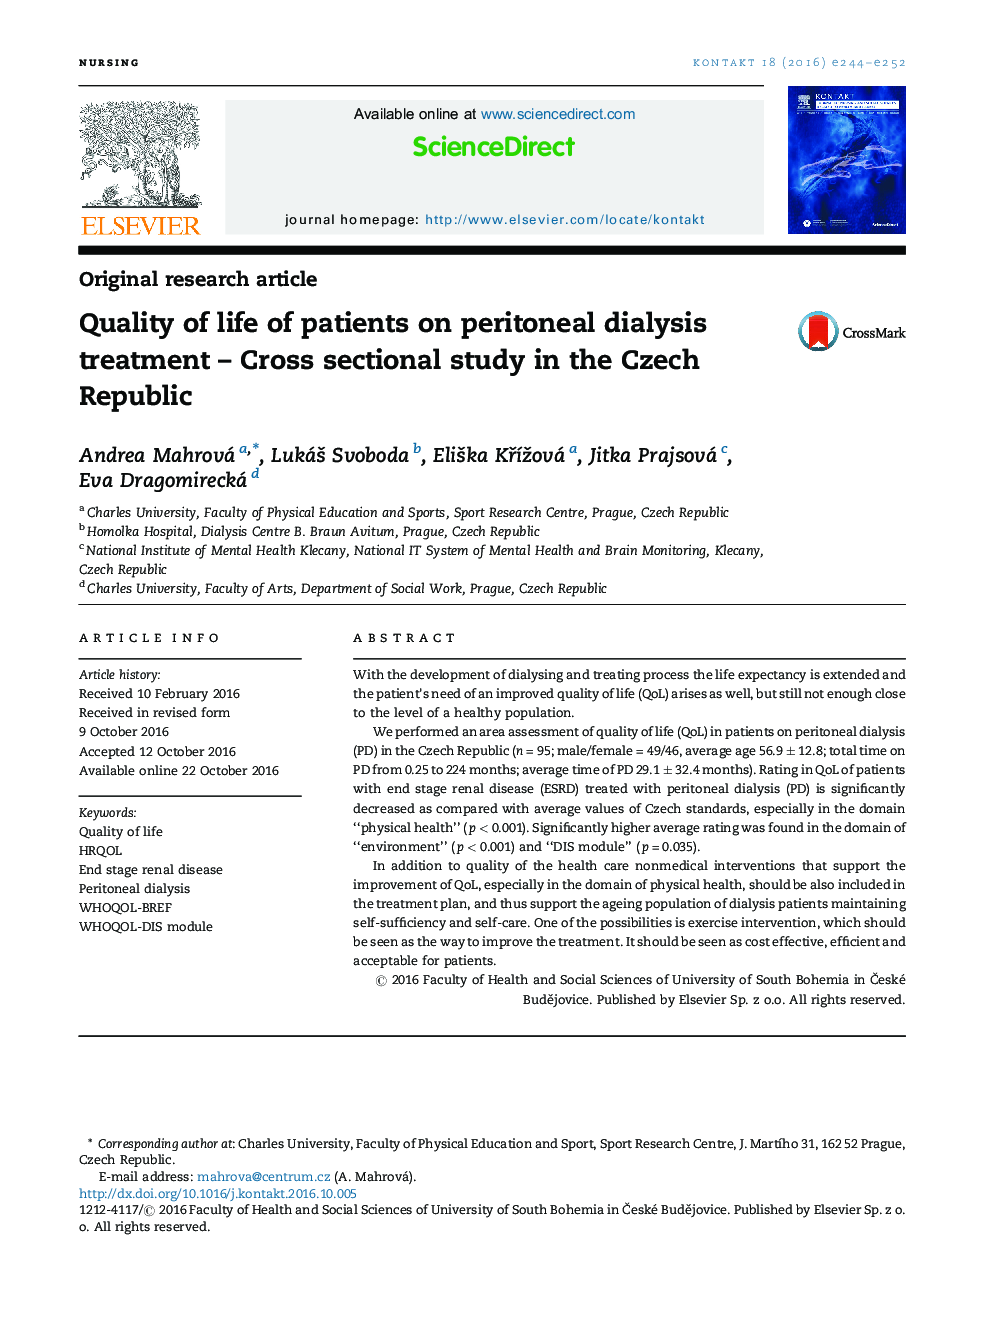 Quality of life of patients on peritoneal dialysis treatment - Cross sectional study in the Czech Republic